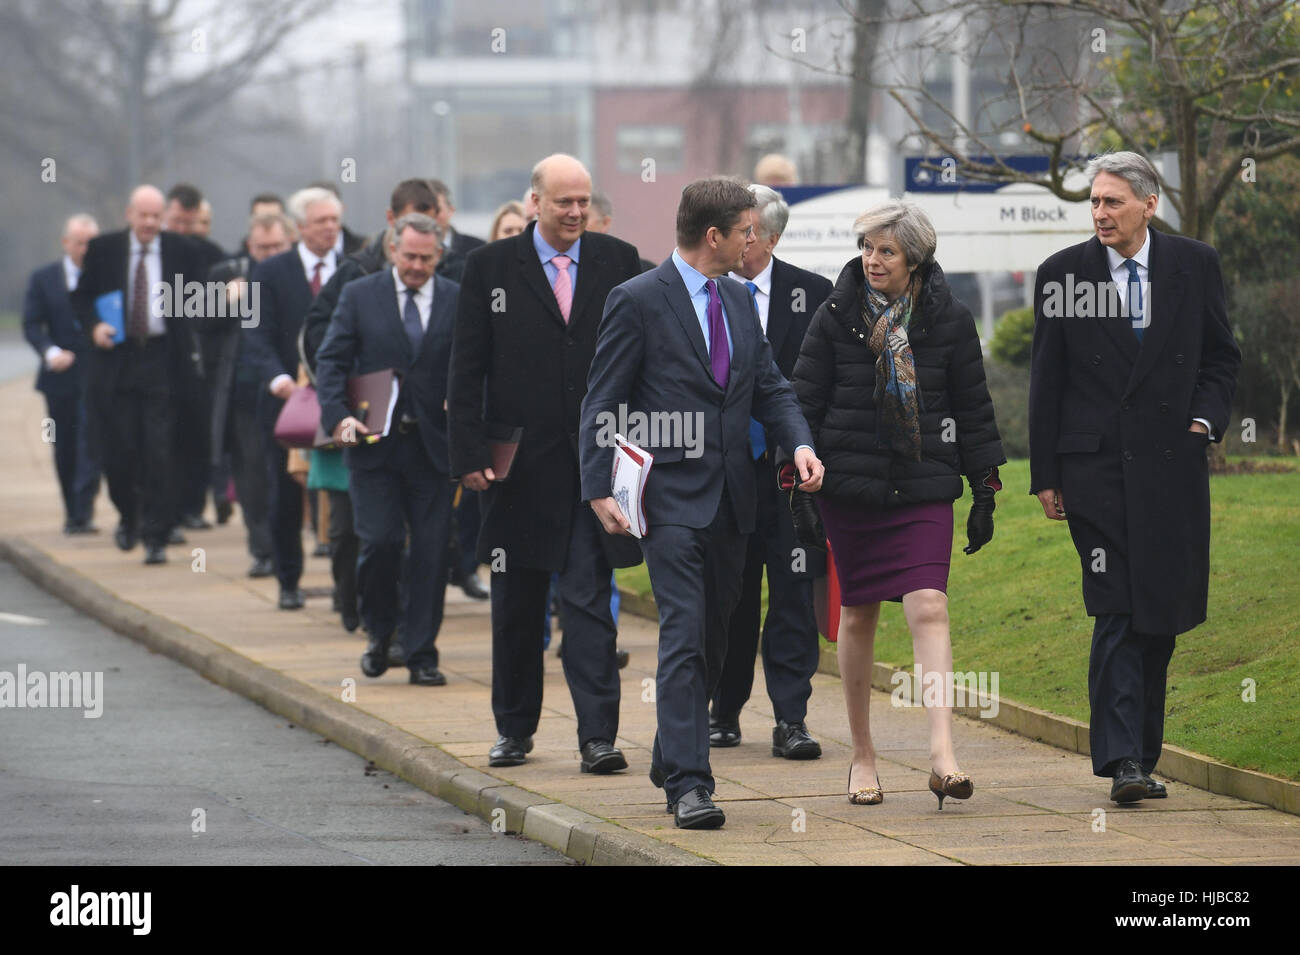 Prime Minister Theresa May arrives to hold a regional Cabinet meeting in Runcorn, Cheshire, as she launched her industrial strategy for post-Brexit Britain with a promise the Government will 'step up' and take an active role in backing business. Stock Photo